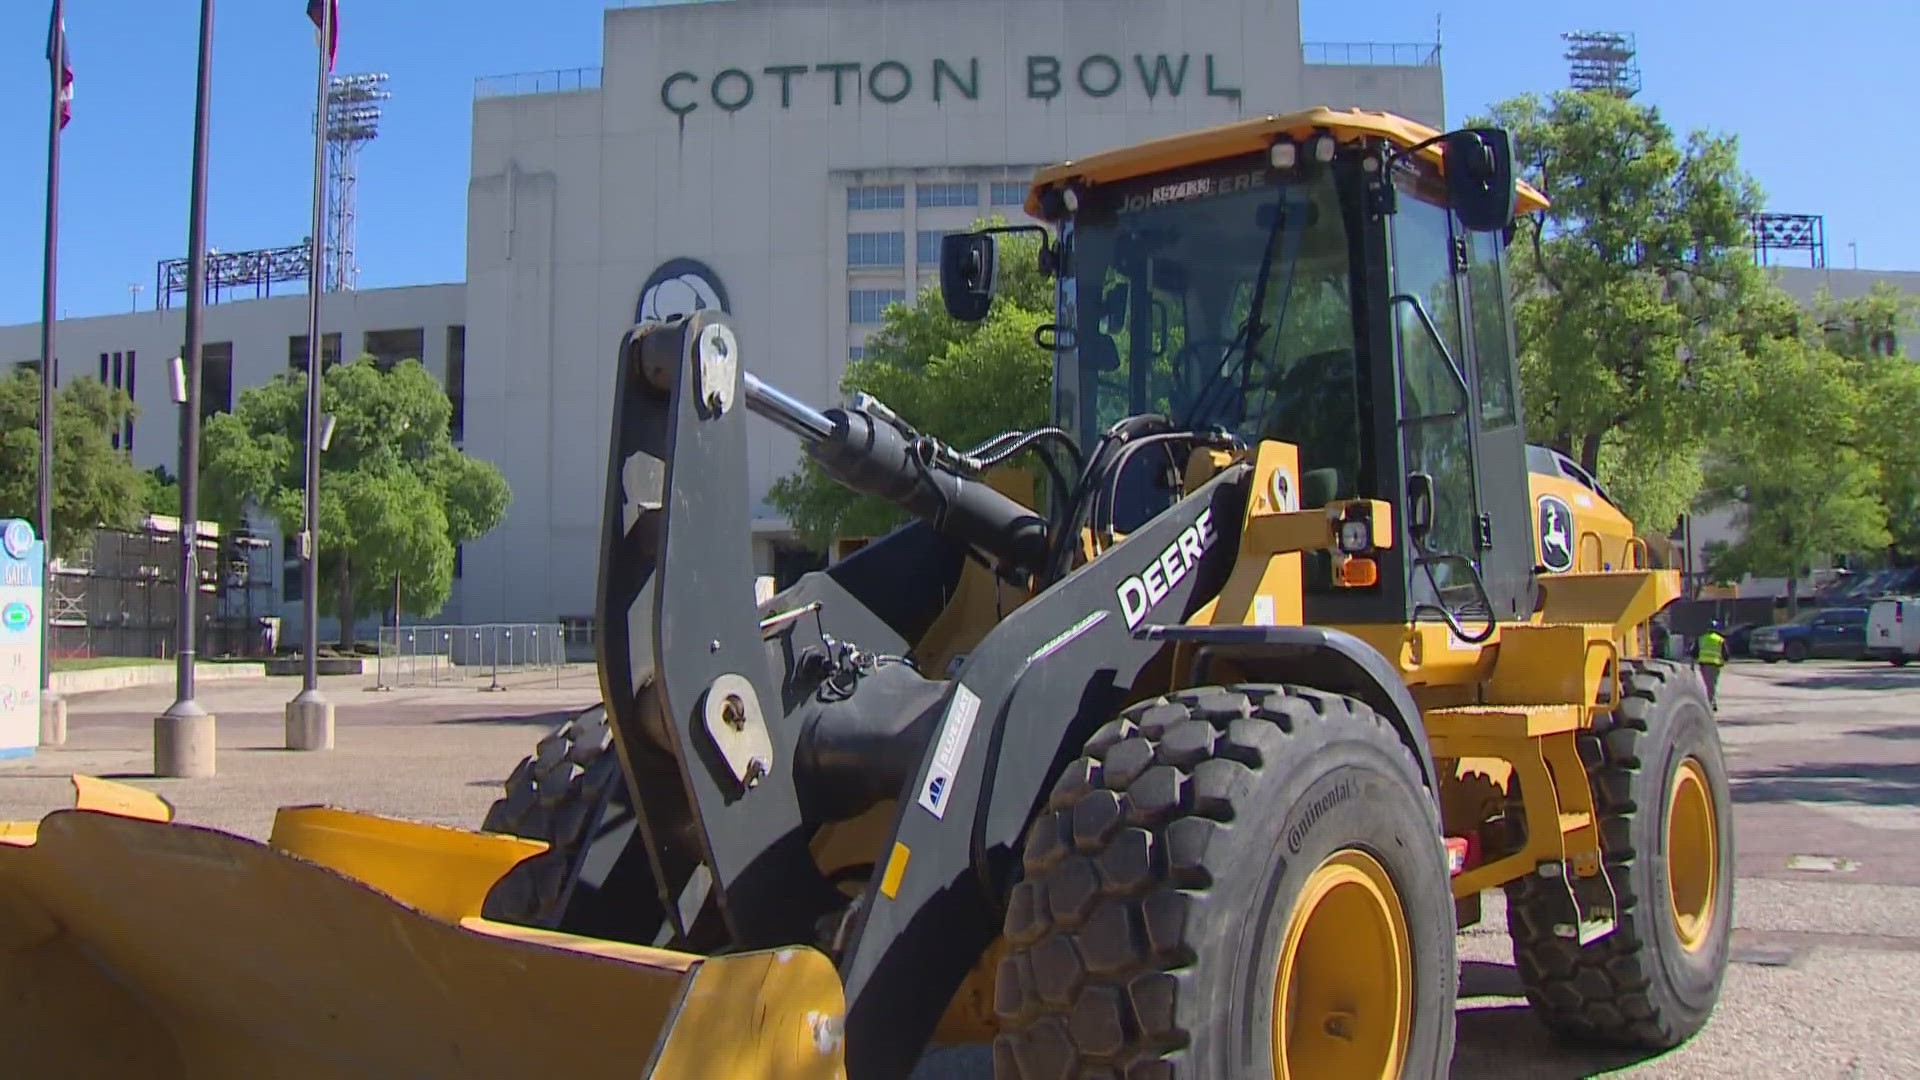 The $140M upgrade to the Cotton Bowl is one of the largest investments in Fair Park's history.